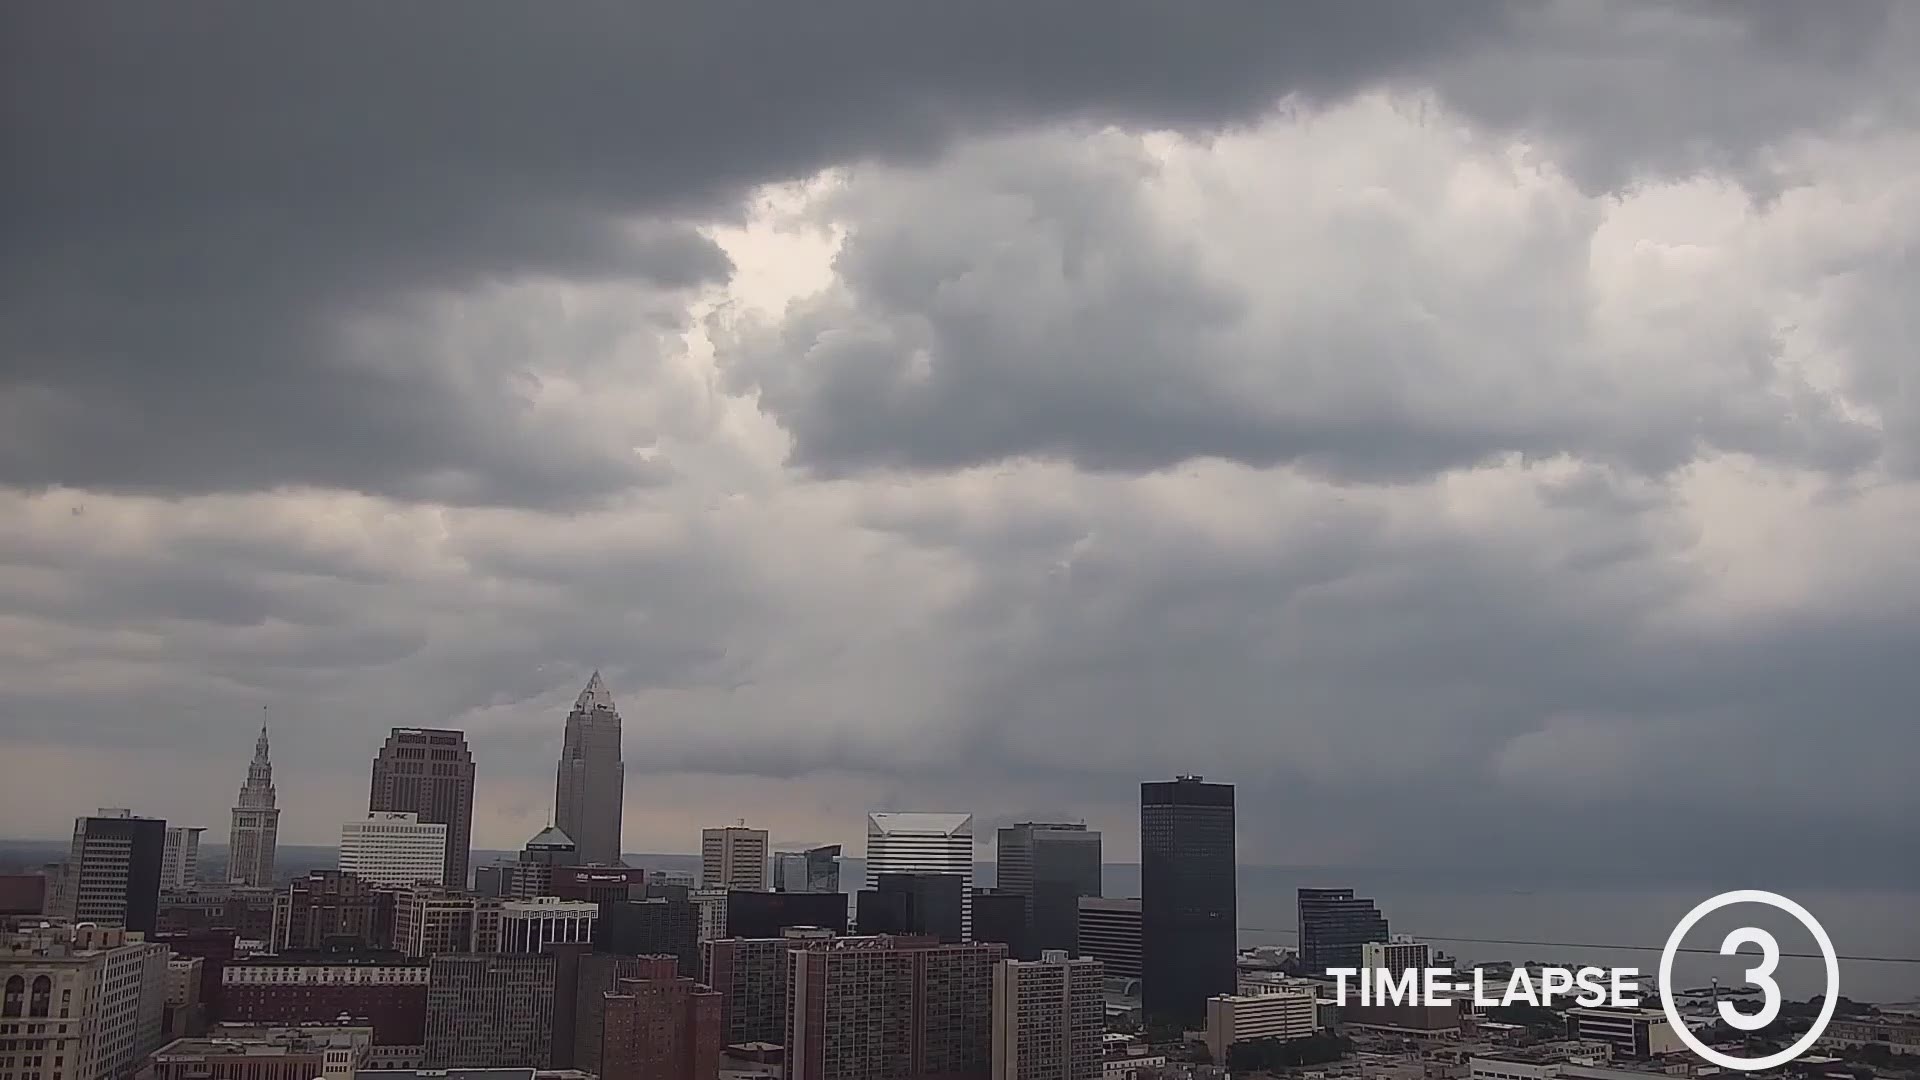 Check out our Friday afternoon time-lapse of the storms that moved through downtown Cleveland during the 4 pm hour from the WKYC Studios CSU Cam. #3weather